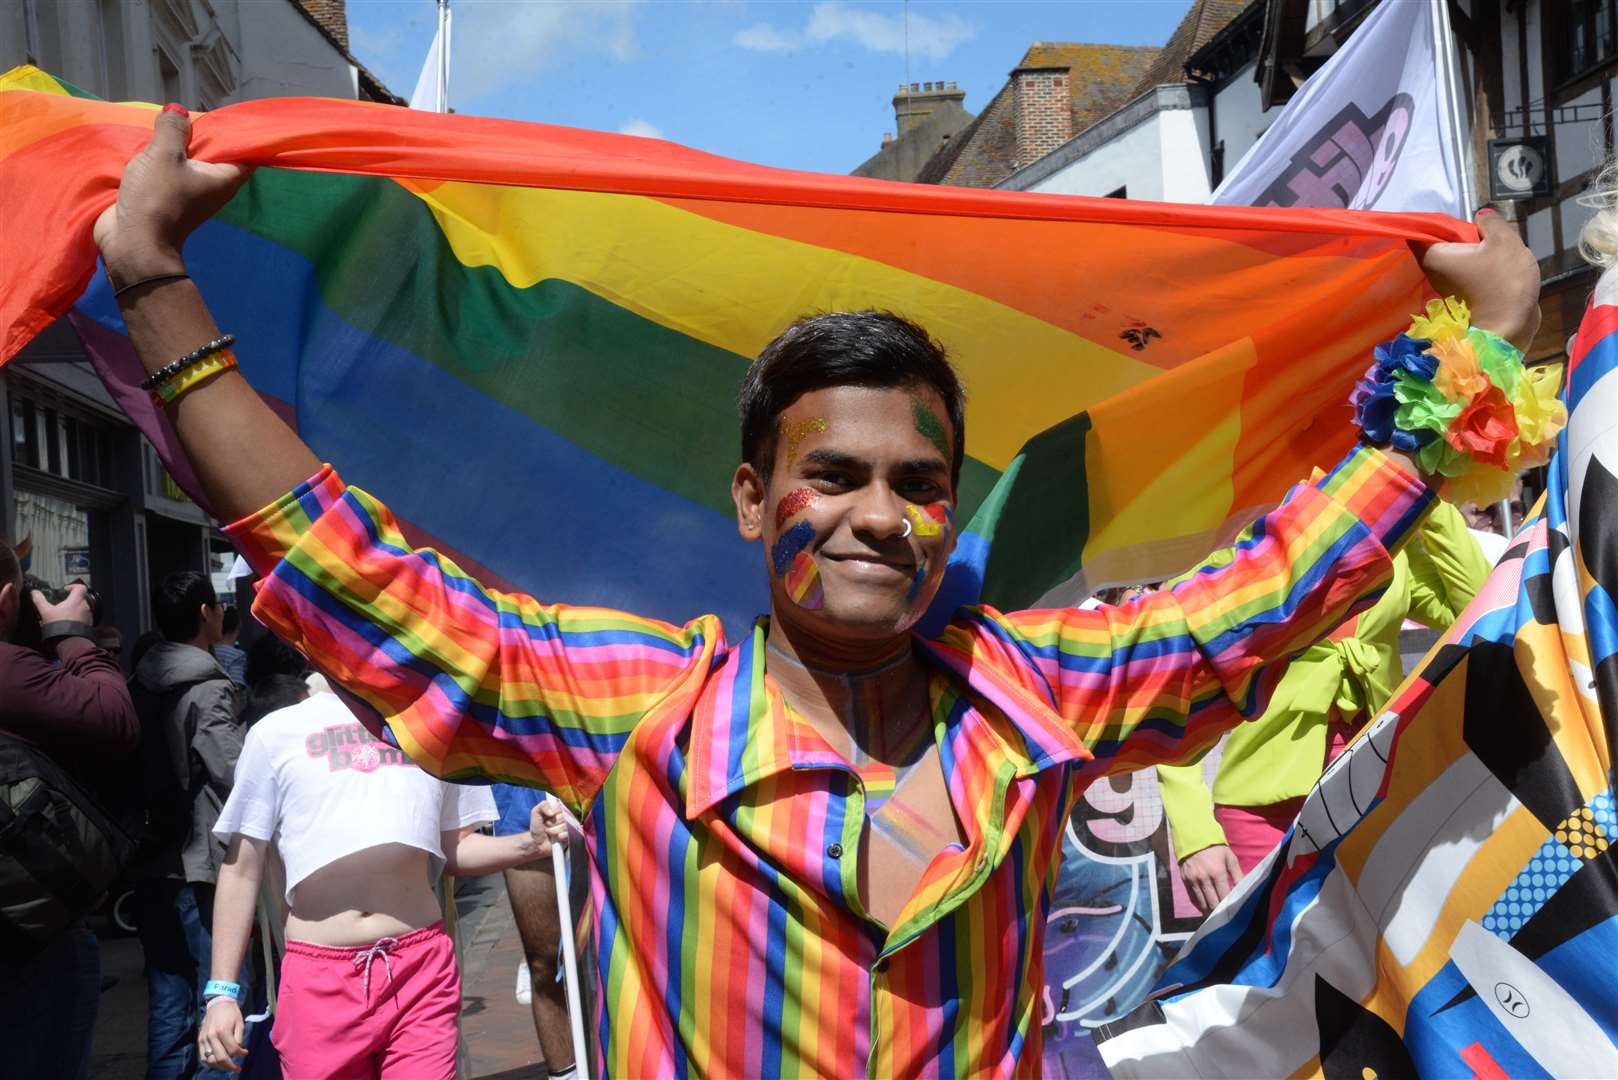 Last yea's Pride Canterbury attracted more than 20,000 people